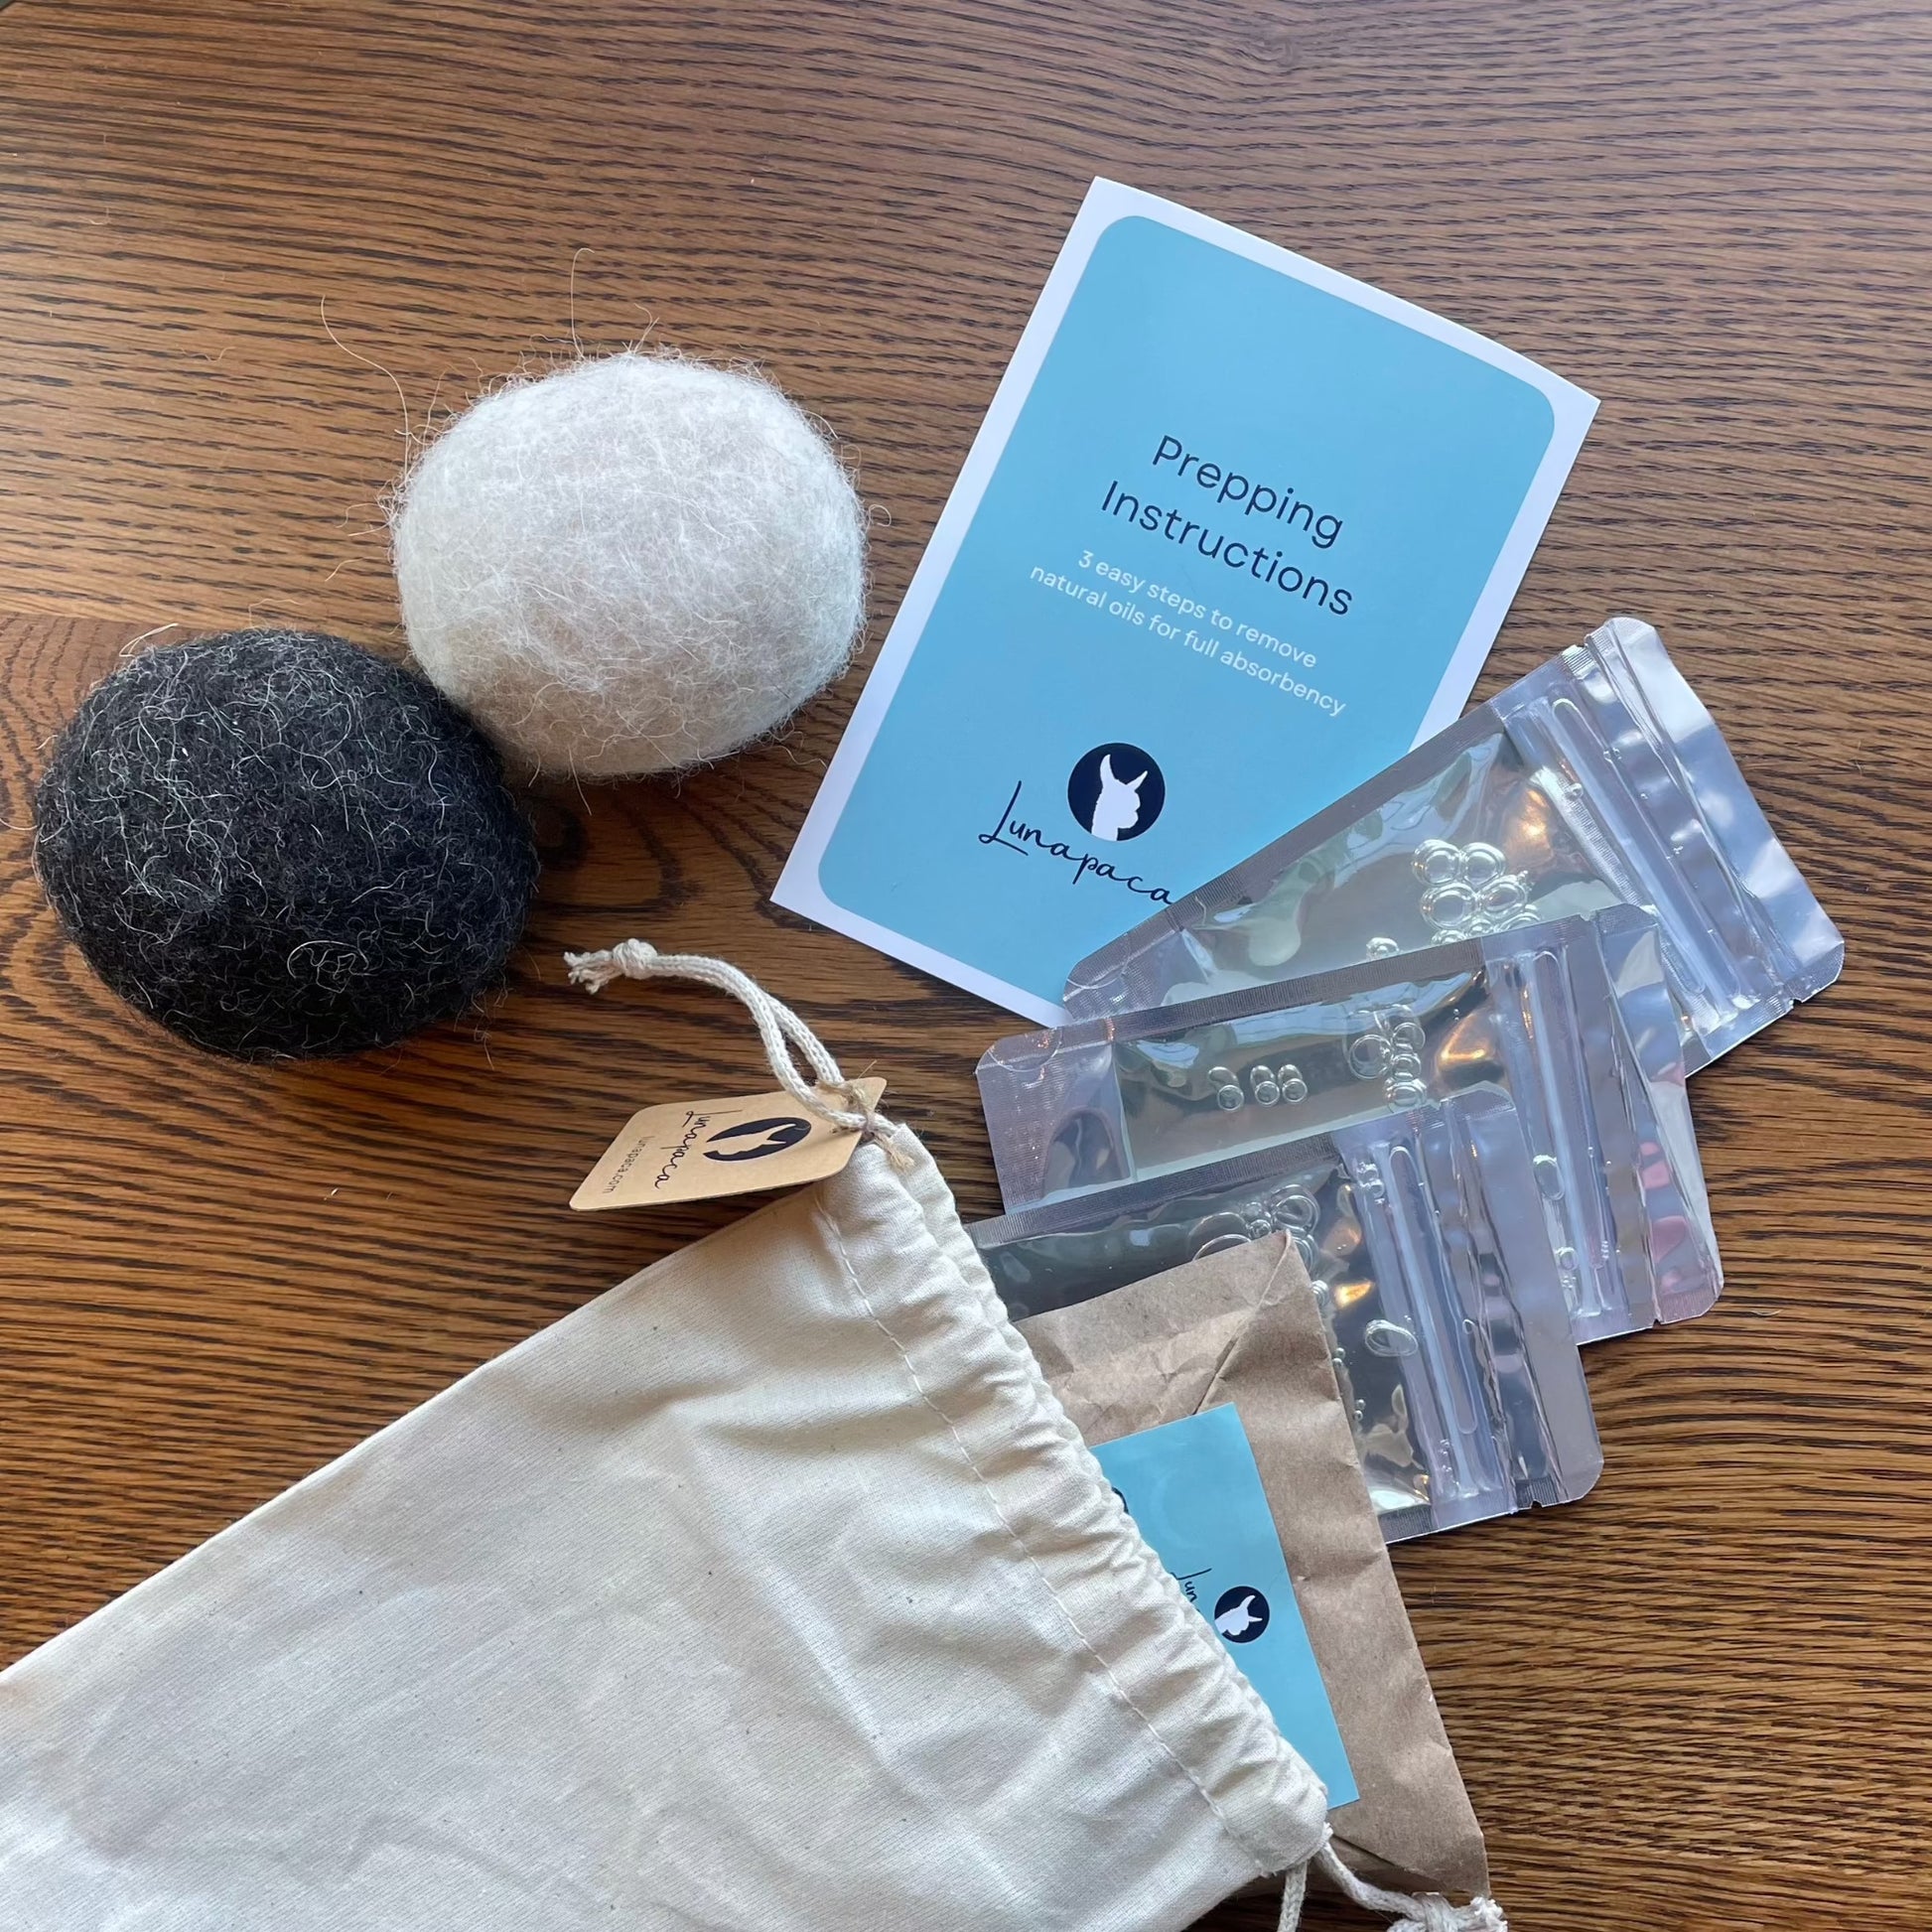 2 alpaca dryer balls next to a card that says "Prepping Instructions" next to 3 packets of liquid detergent, and a sealed paper sack coming out of a cotton drawstring bag on top of a wooden table.